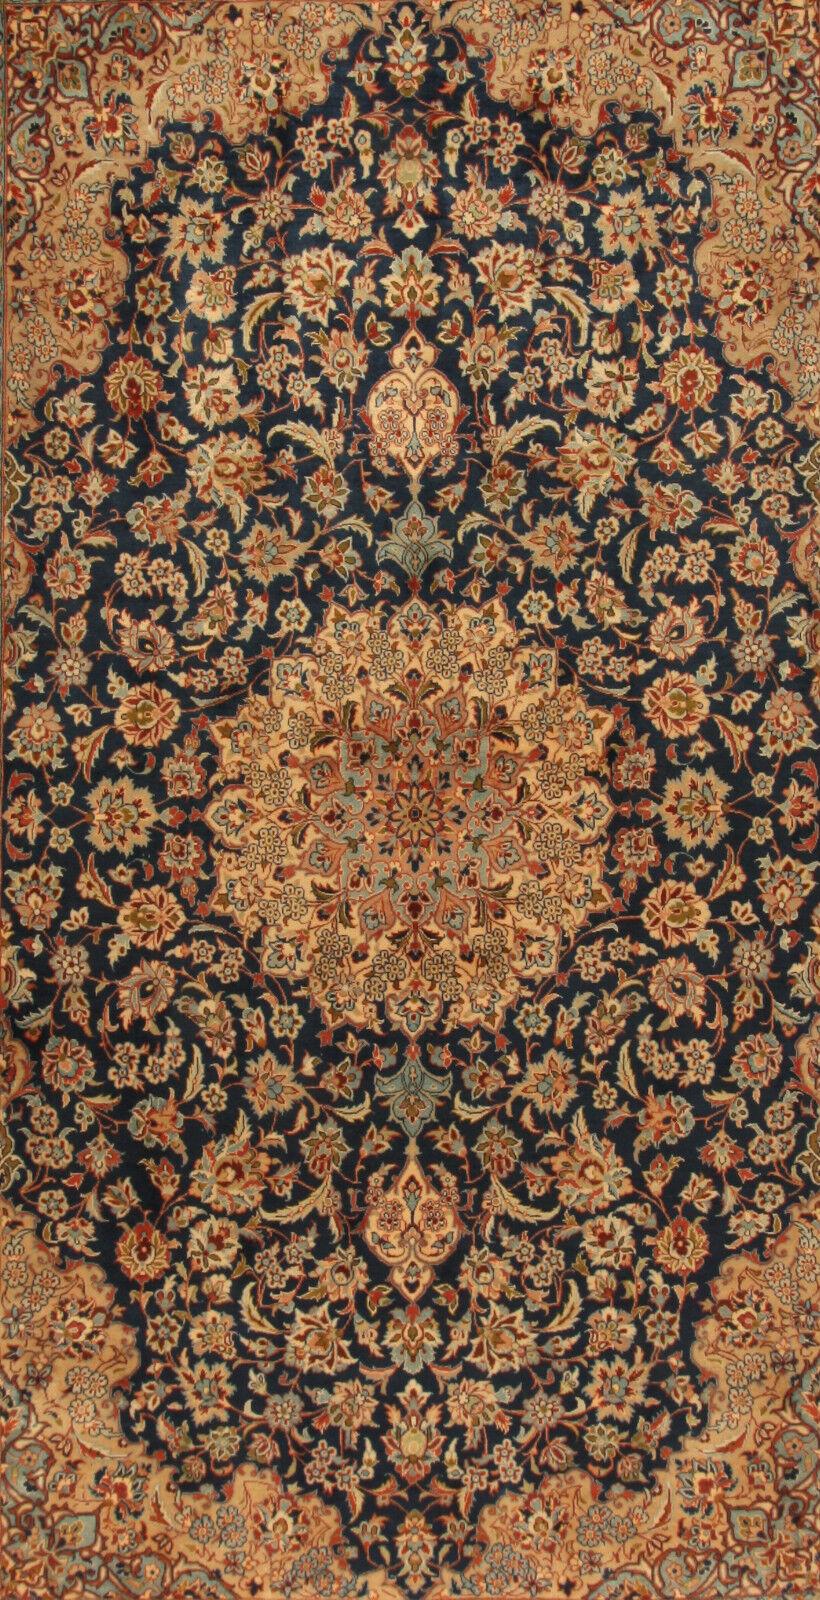 Handmade Vintage Persian Style Isfahan Rug 9.5' x 15', 1970s - 1T29 For Sale 3